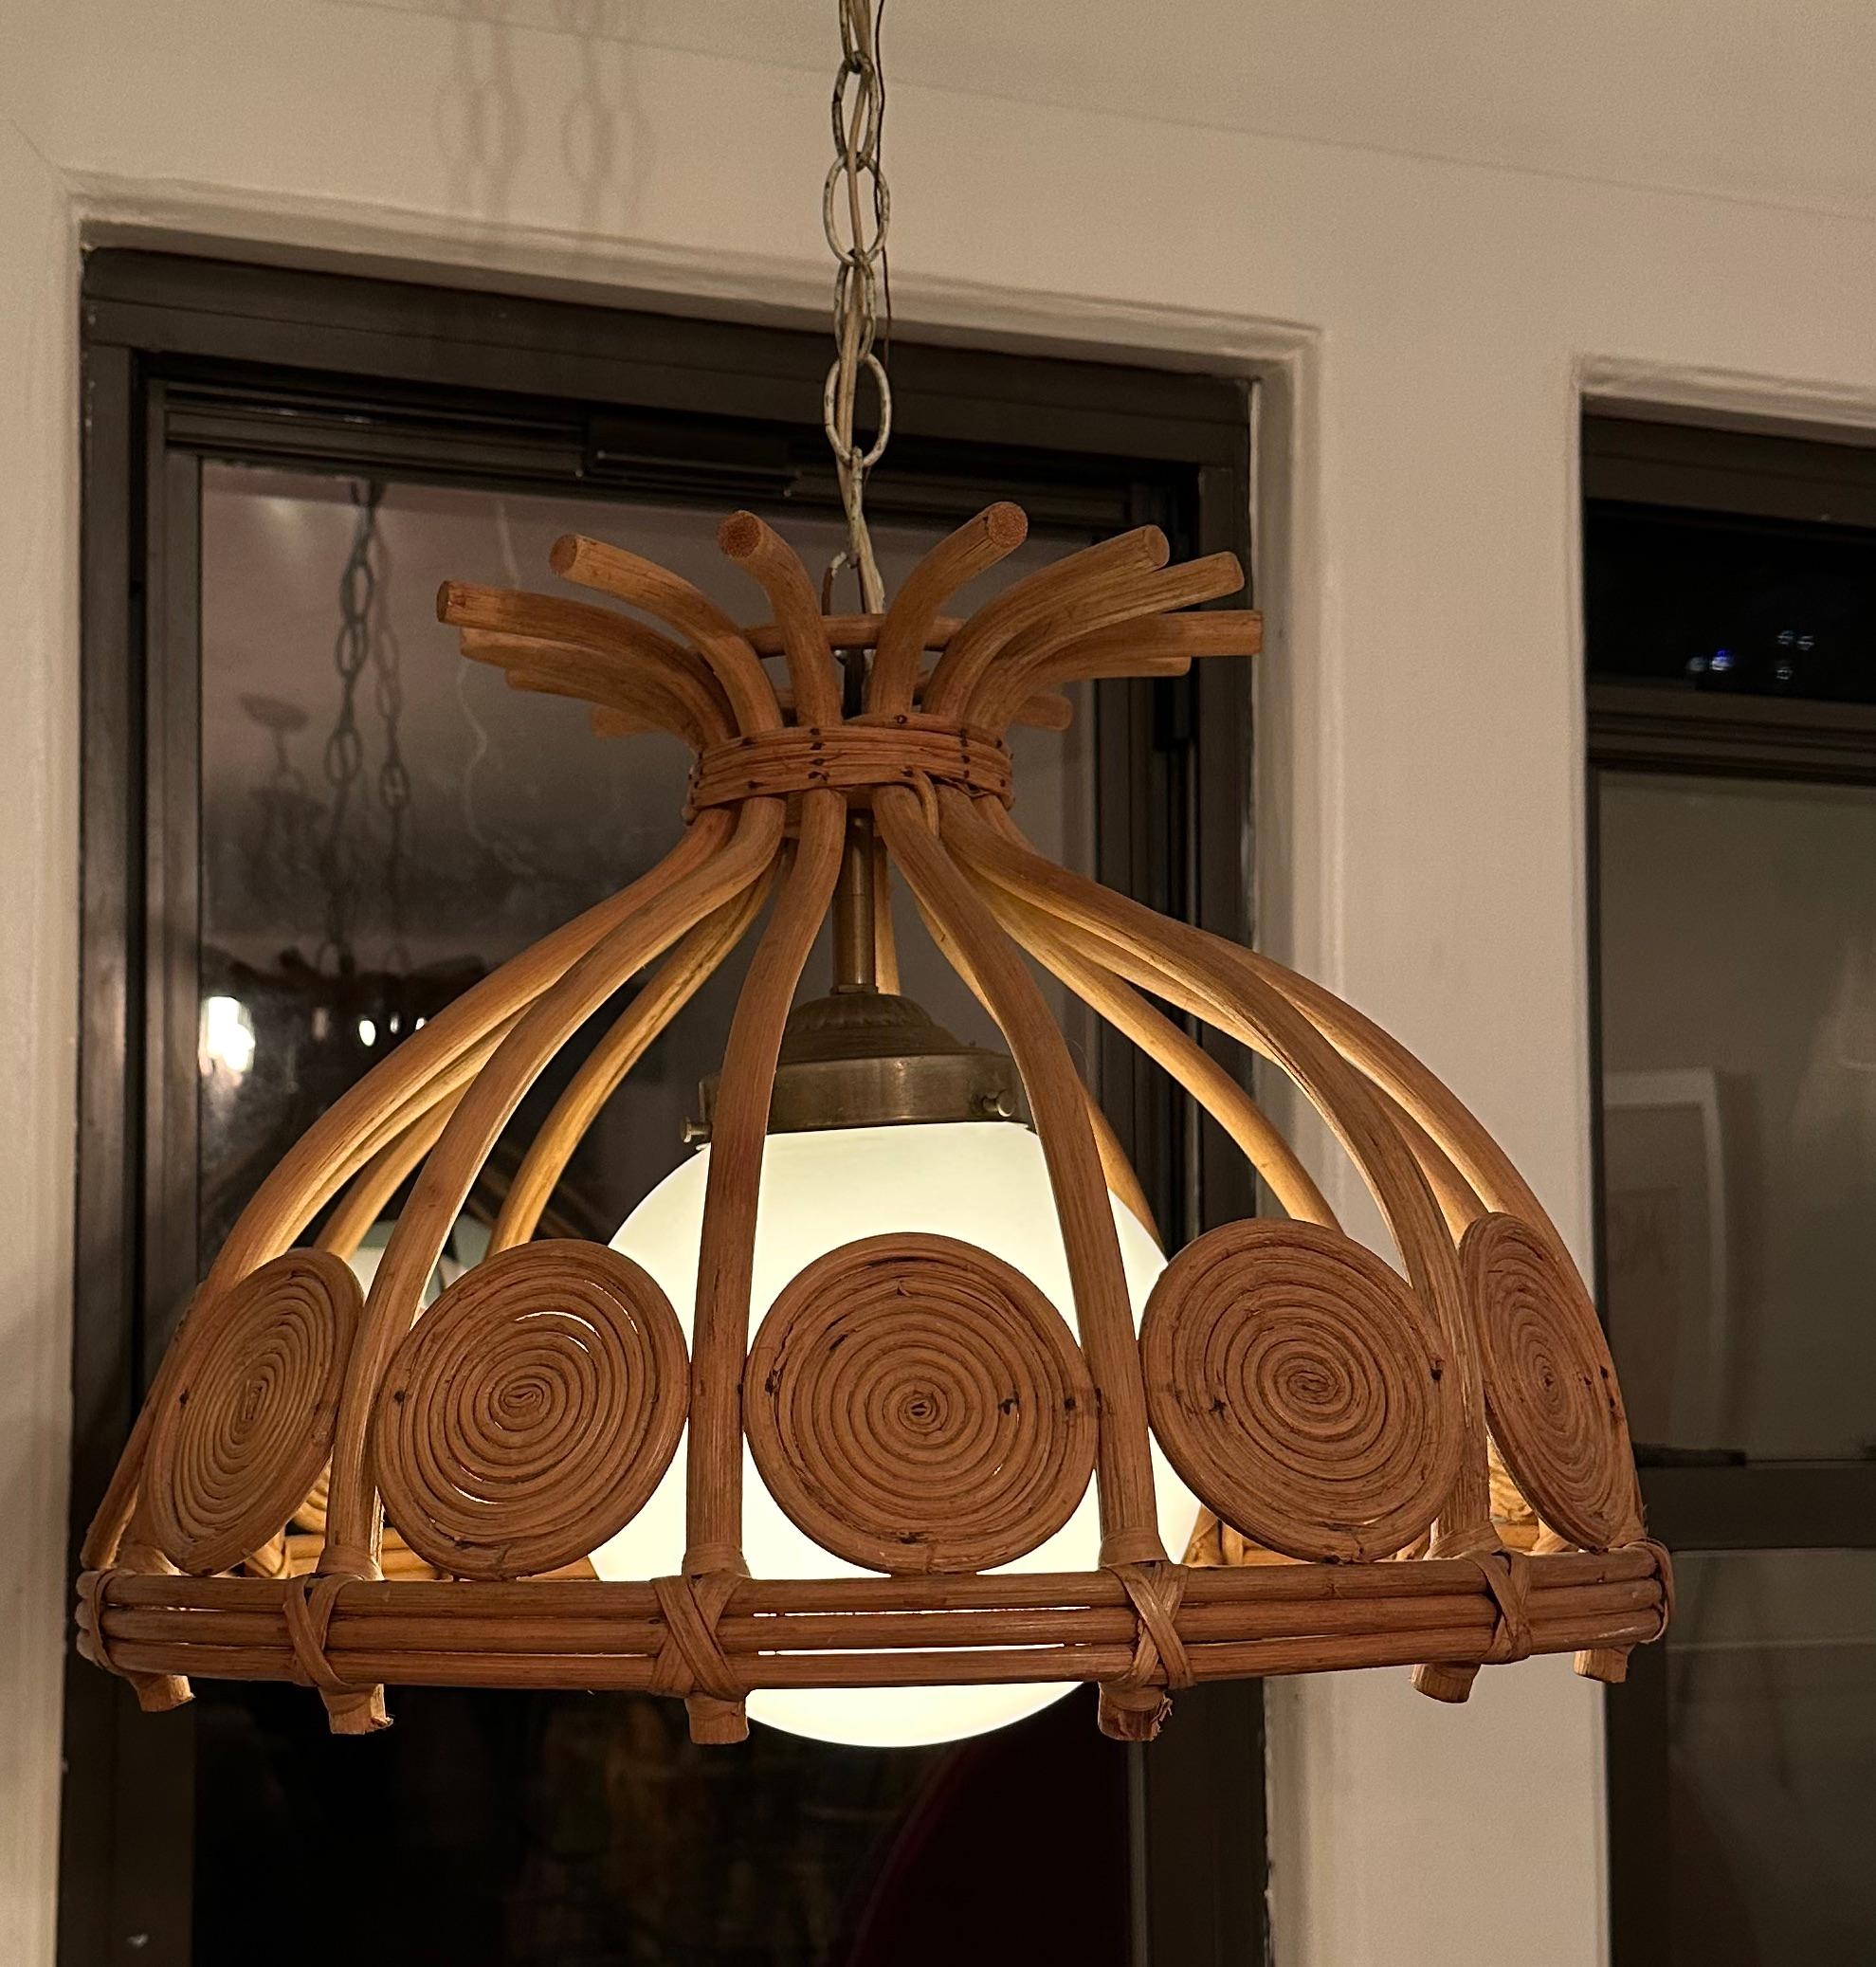 Illuminate your space with a touch of timeless charm. Vintage Rattan Hanging Pendant Lamp brings warmth and character to any room, blending natural elegance with retro allure. A captivating focal point that transcends trends, casting a warm glow and